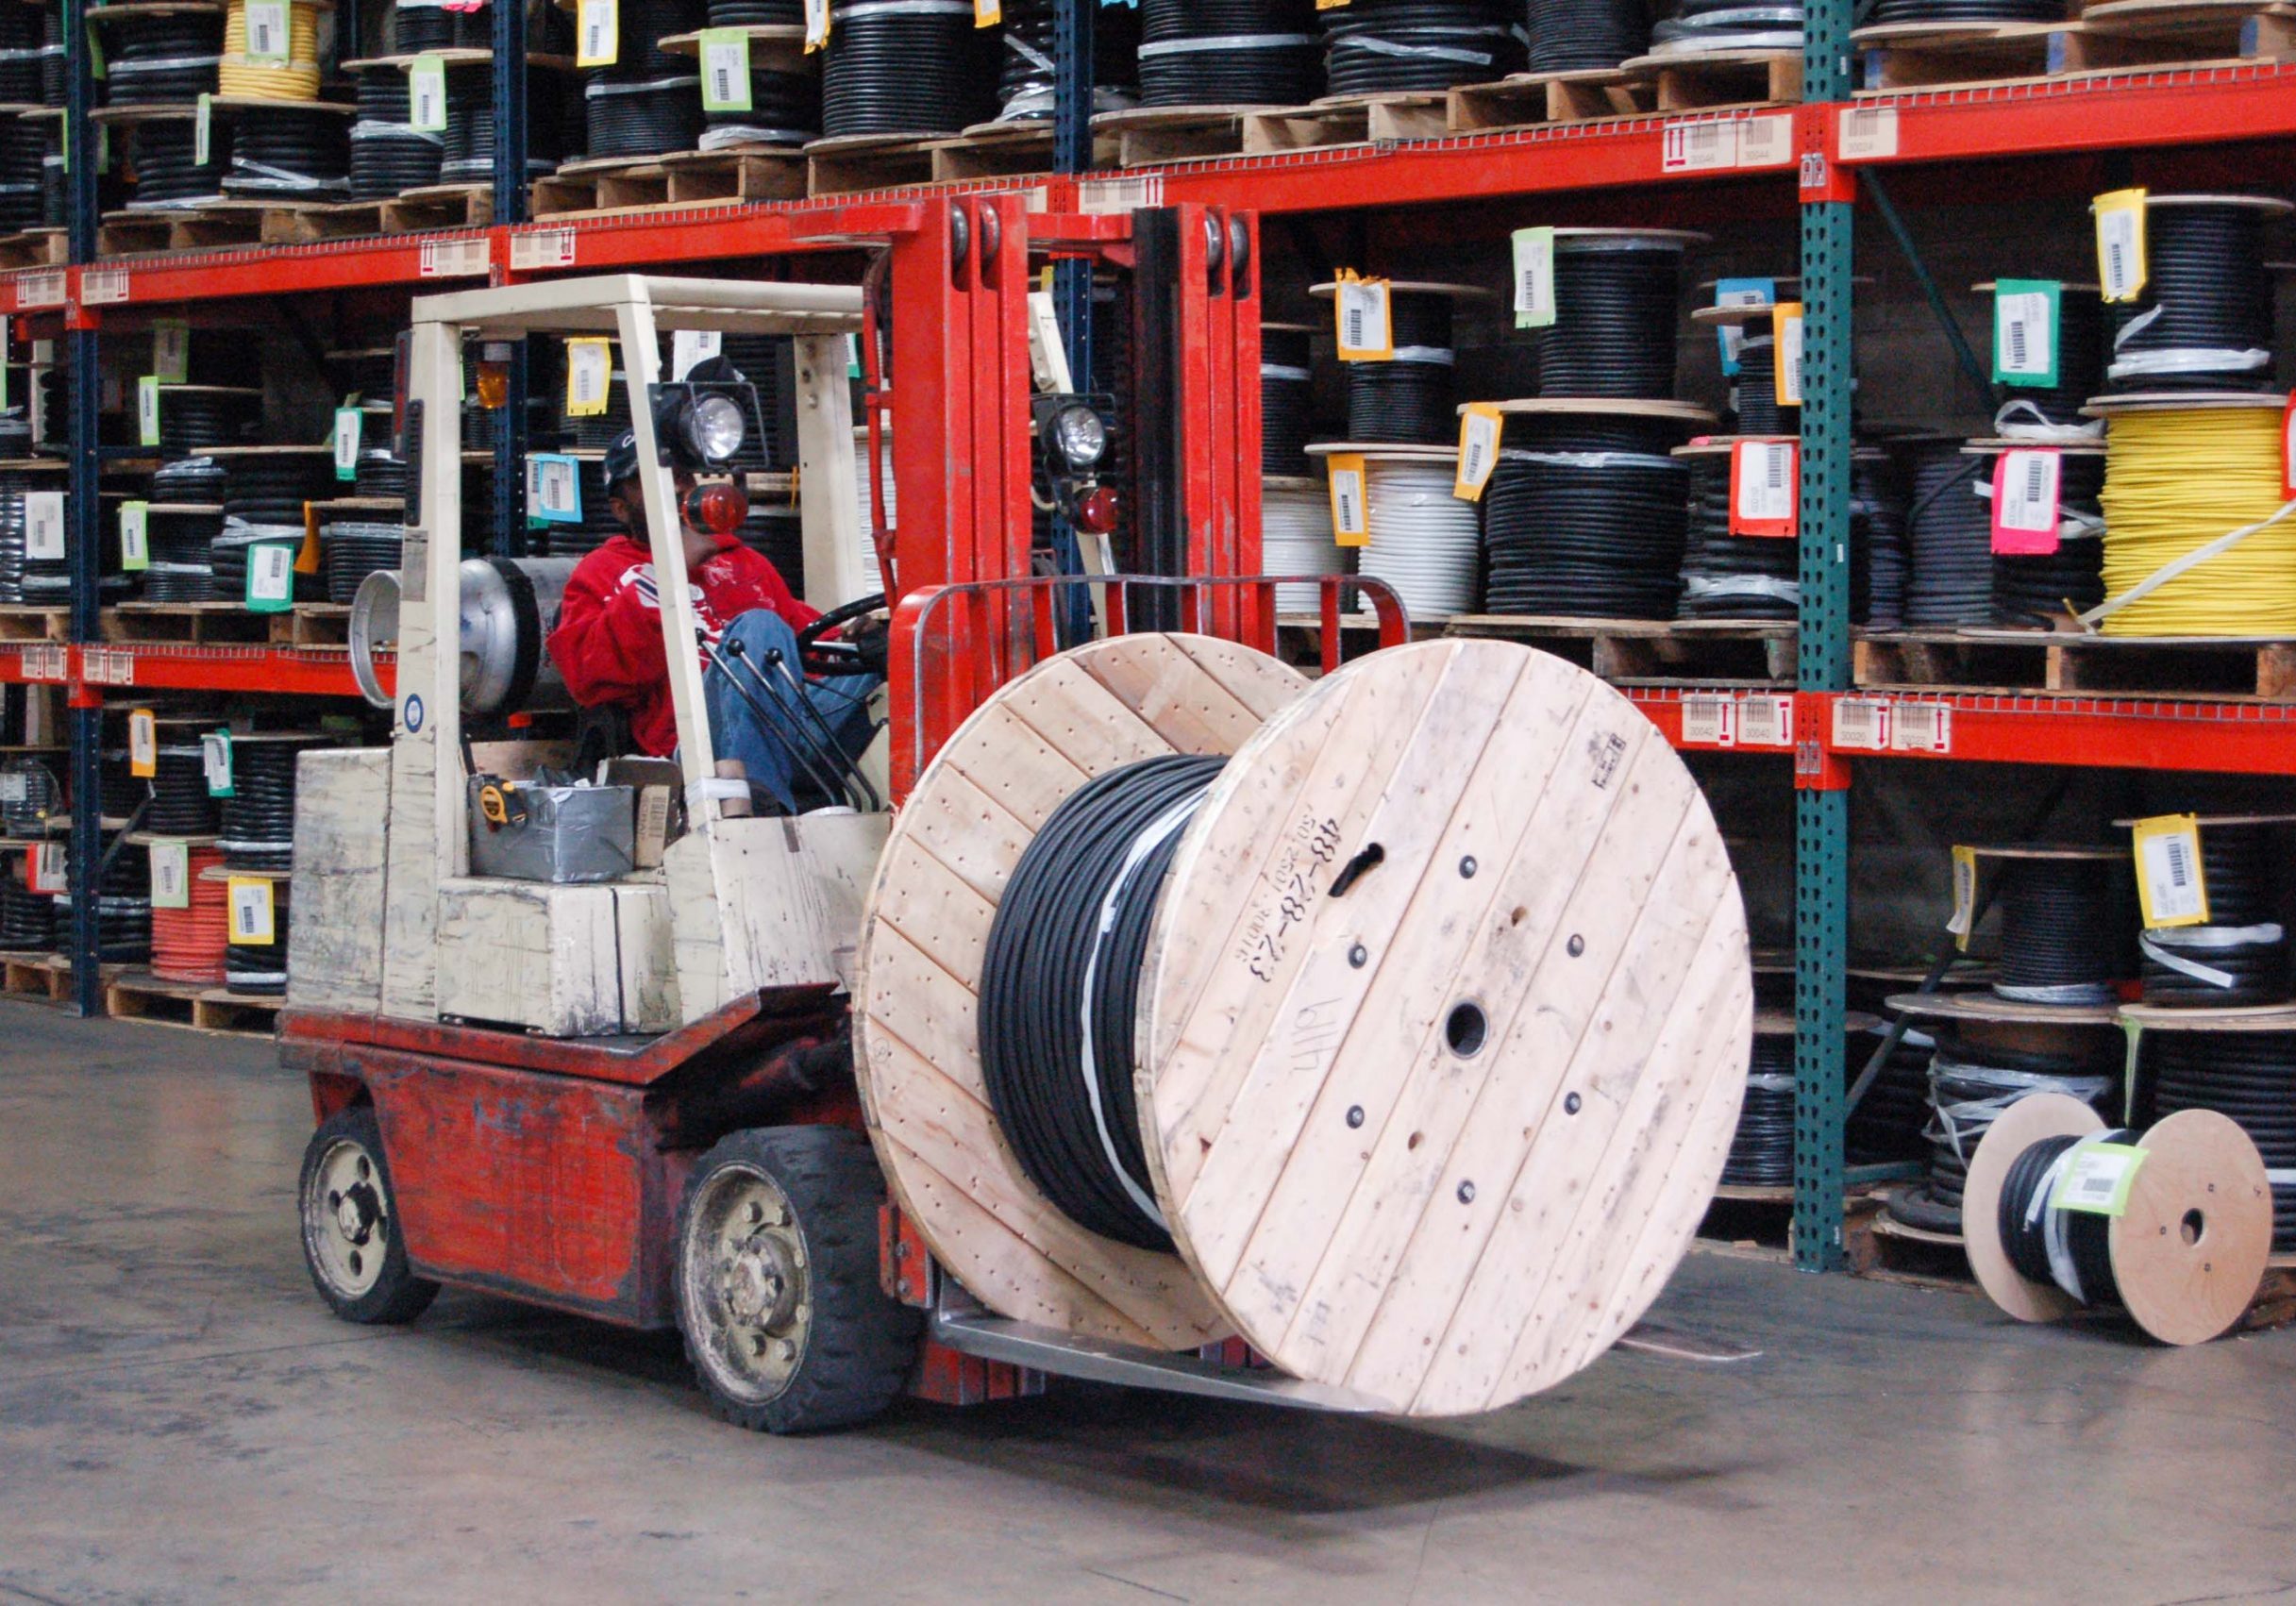 A reel of wire being transported in a warehouse via forklift.